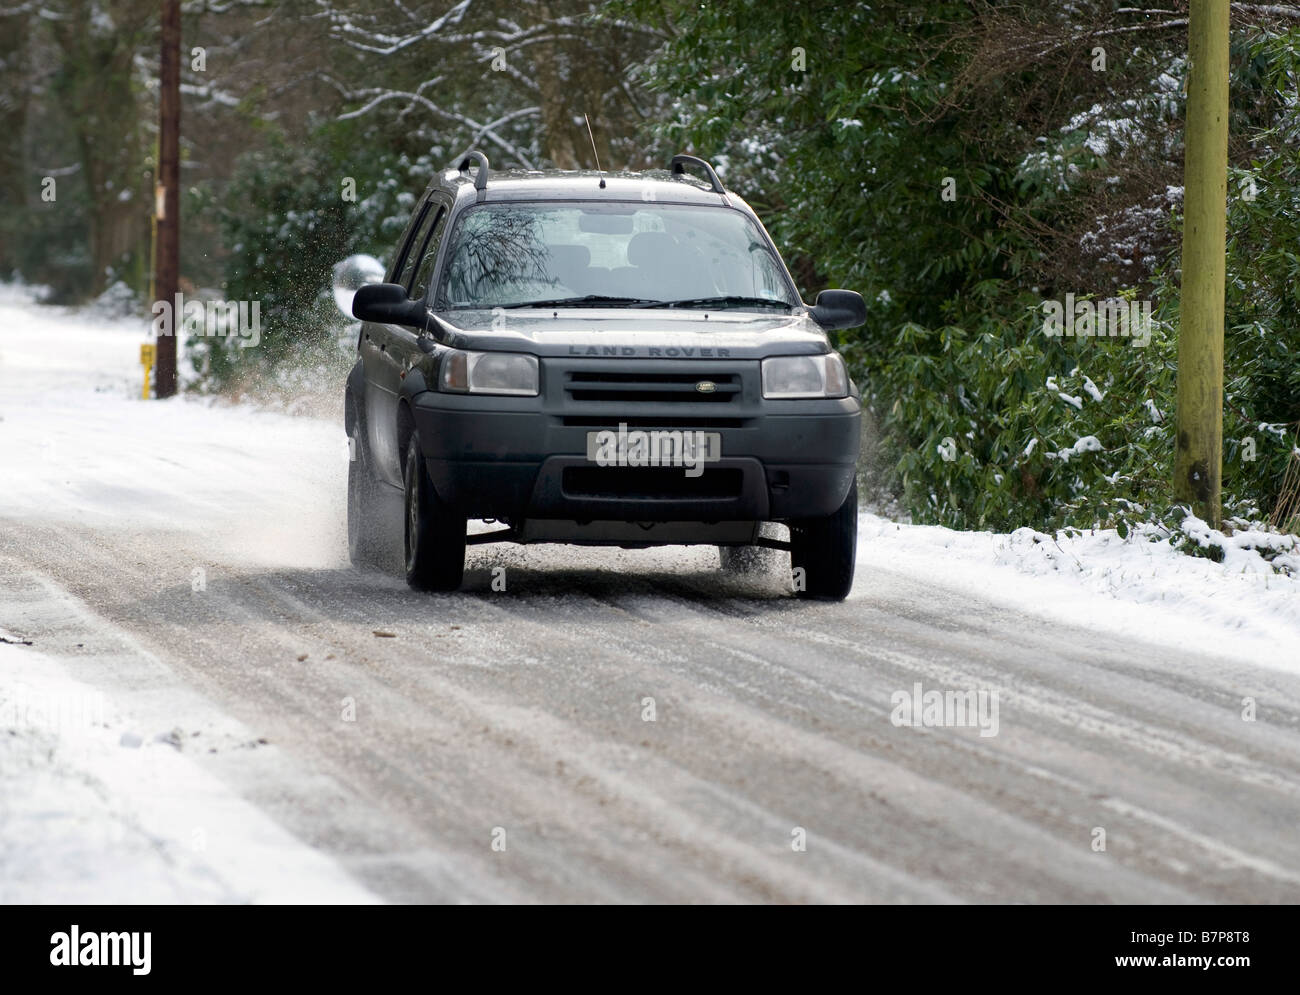 2001 Land Rover Freelander driving on icy road Stock Photo